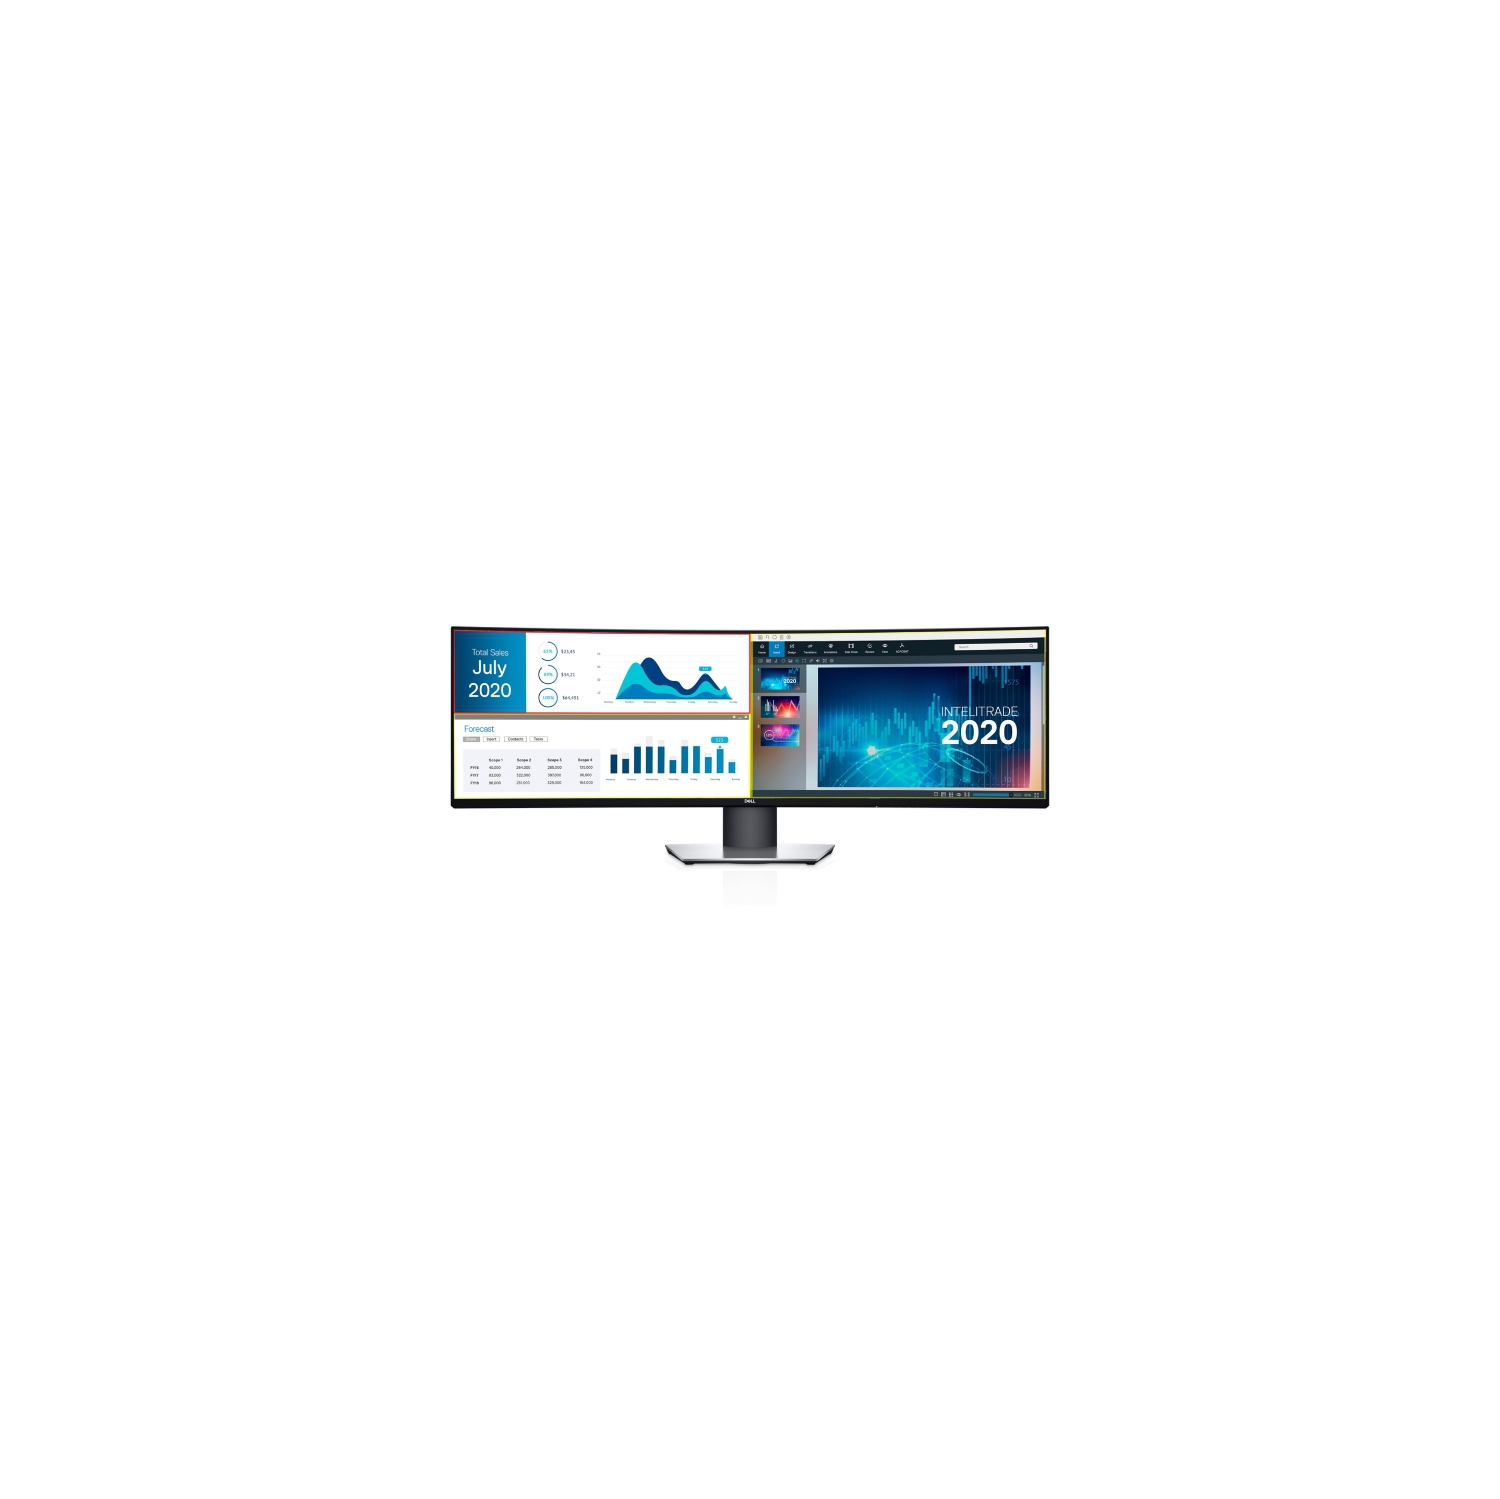 Refurbished (Excellent) - Dell UltraSharp 49" Dual QHD 60Hz 8ms Curved IPS LCD Monitor (U4919DW) - Black - 1 Year Seller Provided Warranty